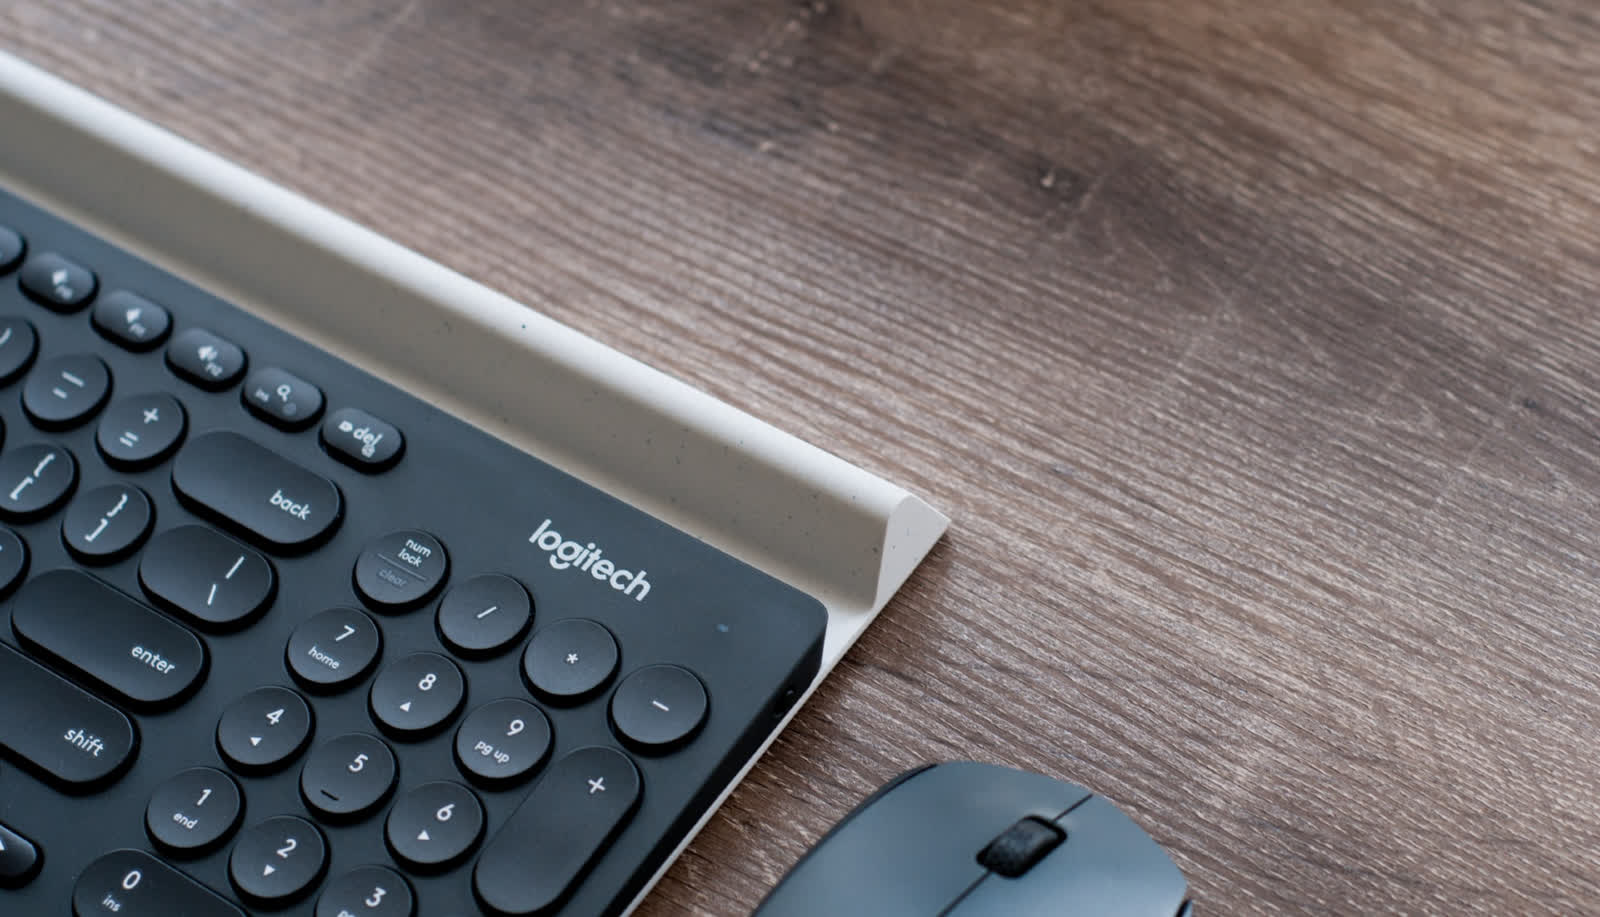 Logitech reports record sales but warns of issues supplying demand moving forward